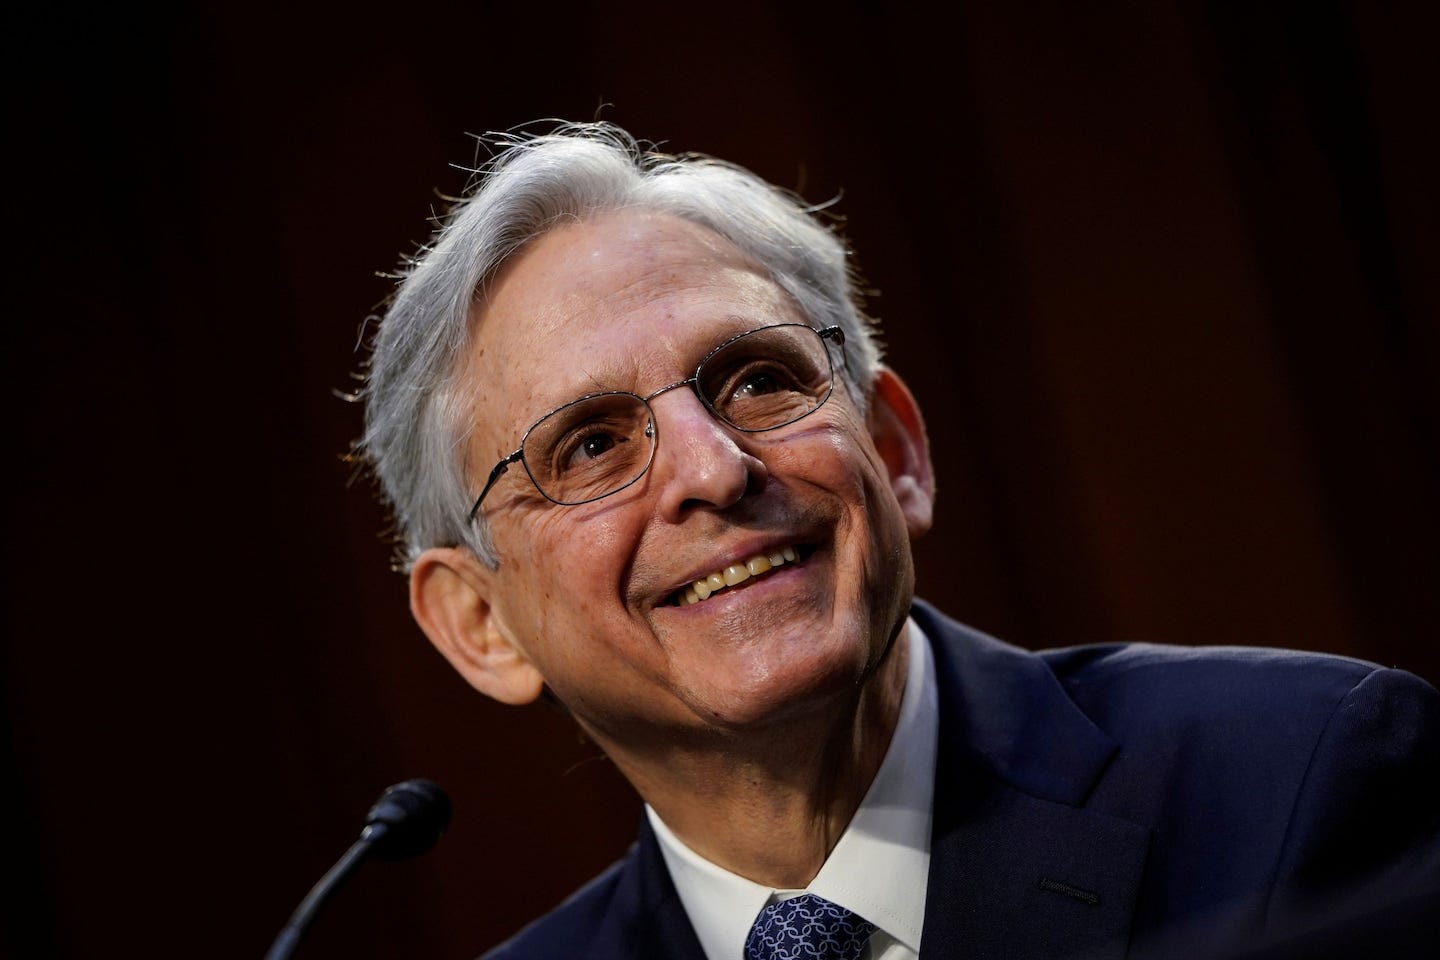 Merrick Garland confirmed as attorney general - The Washington Post